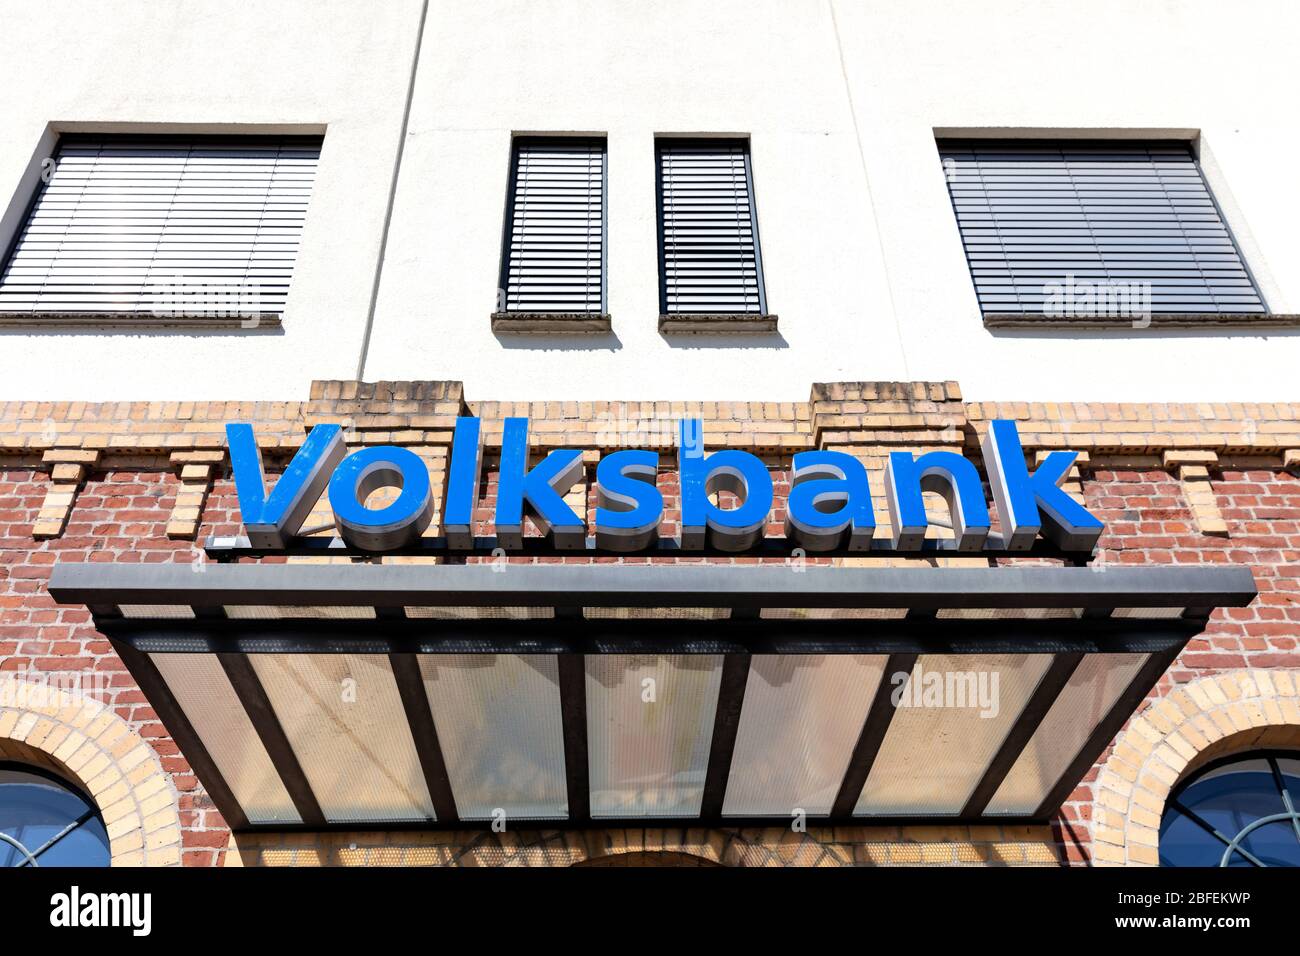 Volksbank branch. Volksbank is a brand of co-operative banks in Germany. Stock Photo